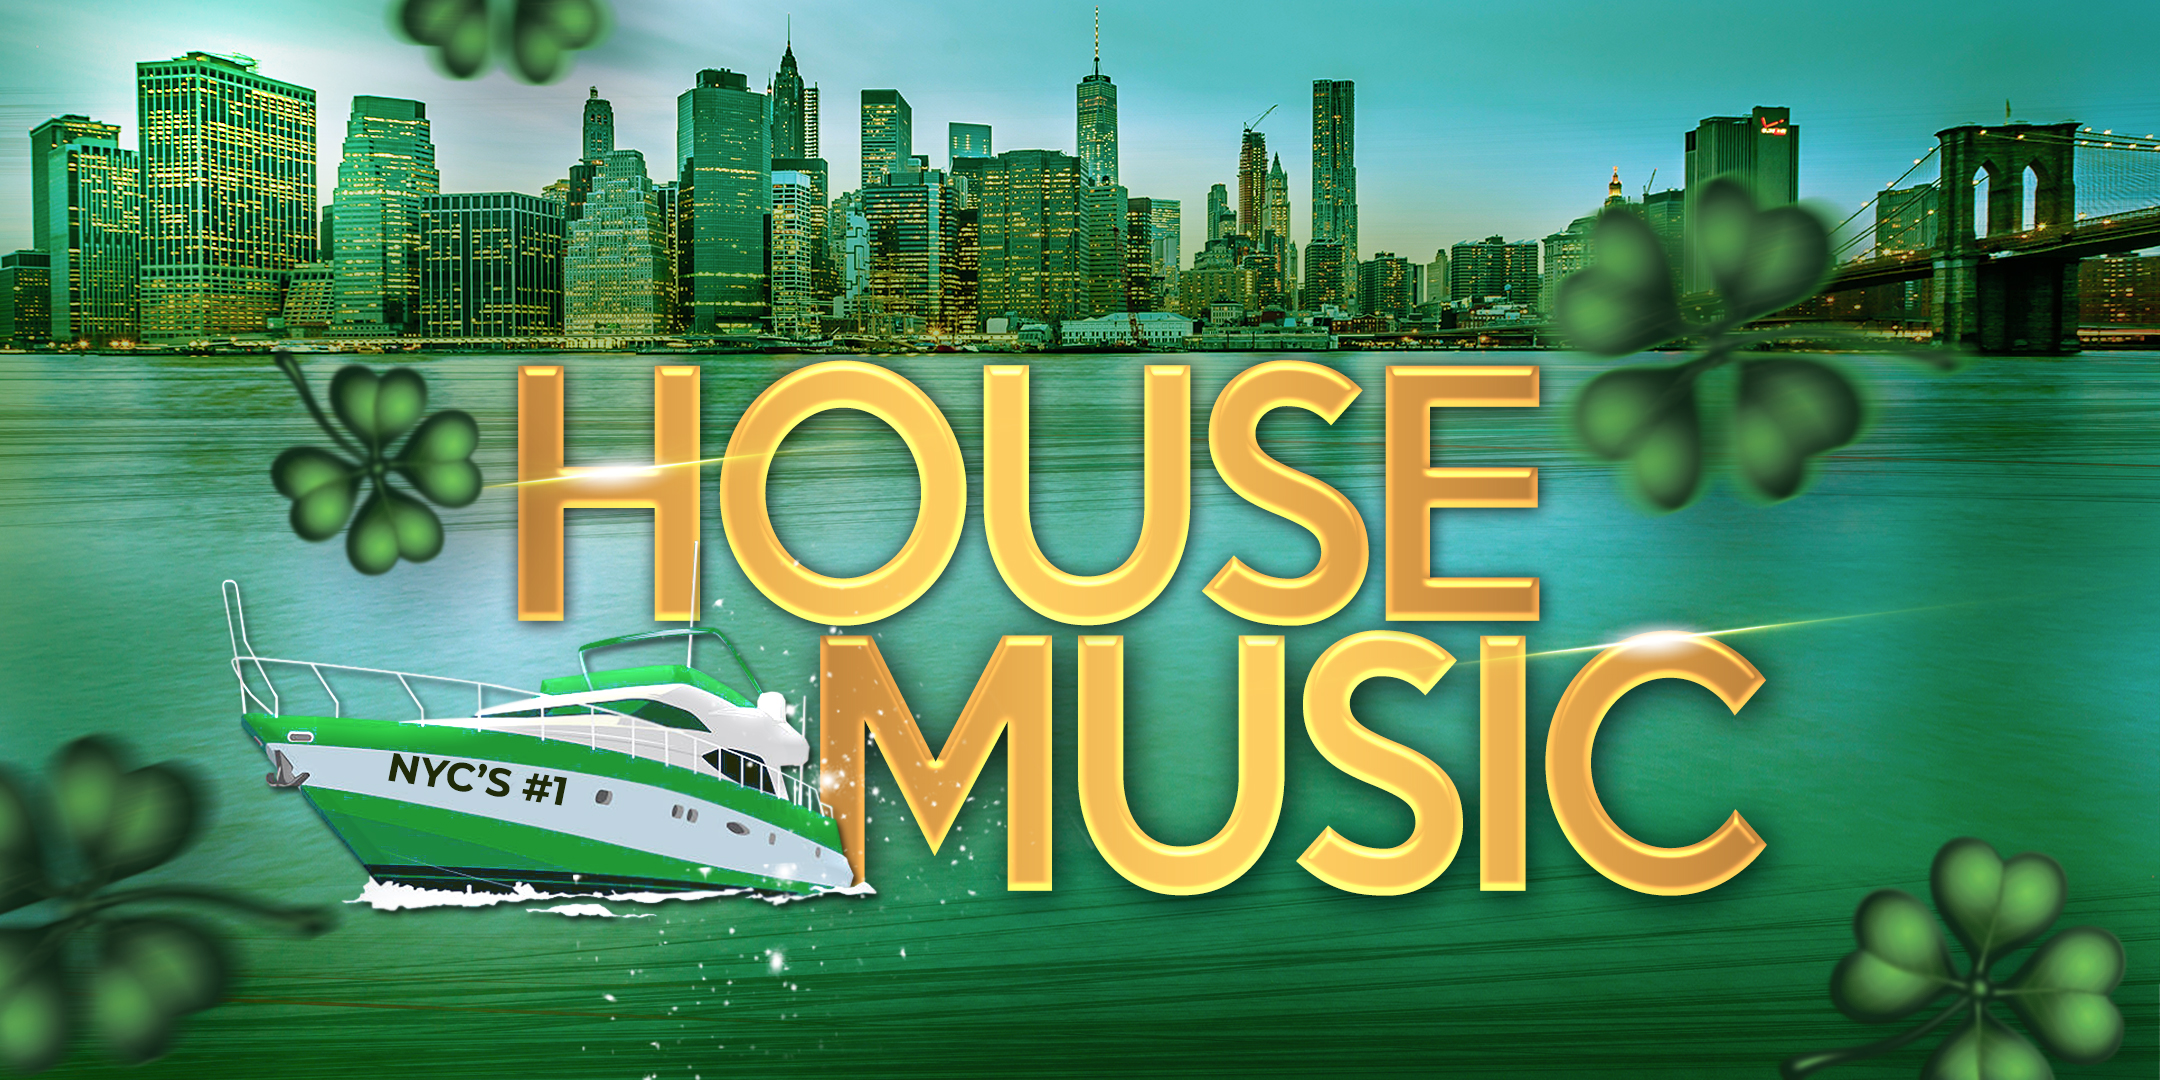 The #1 House Music ST. PATRICK'S DAY PARTY Cruise NYC